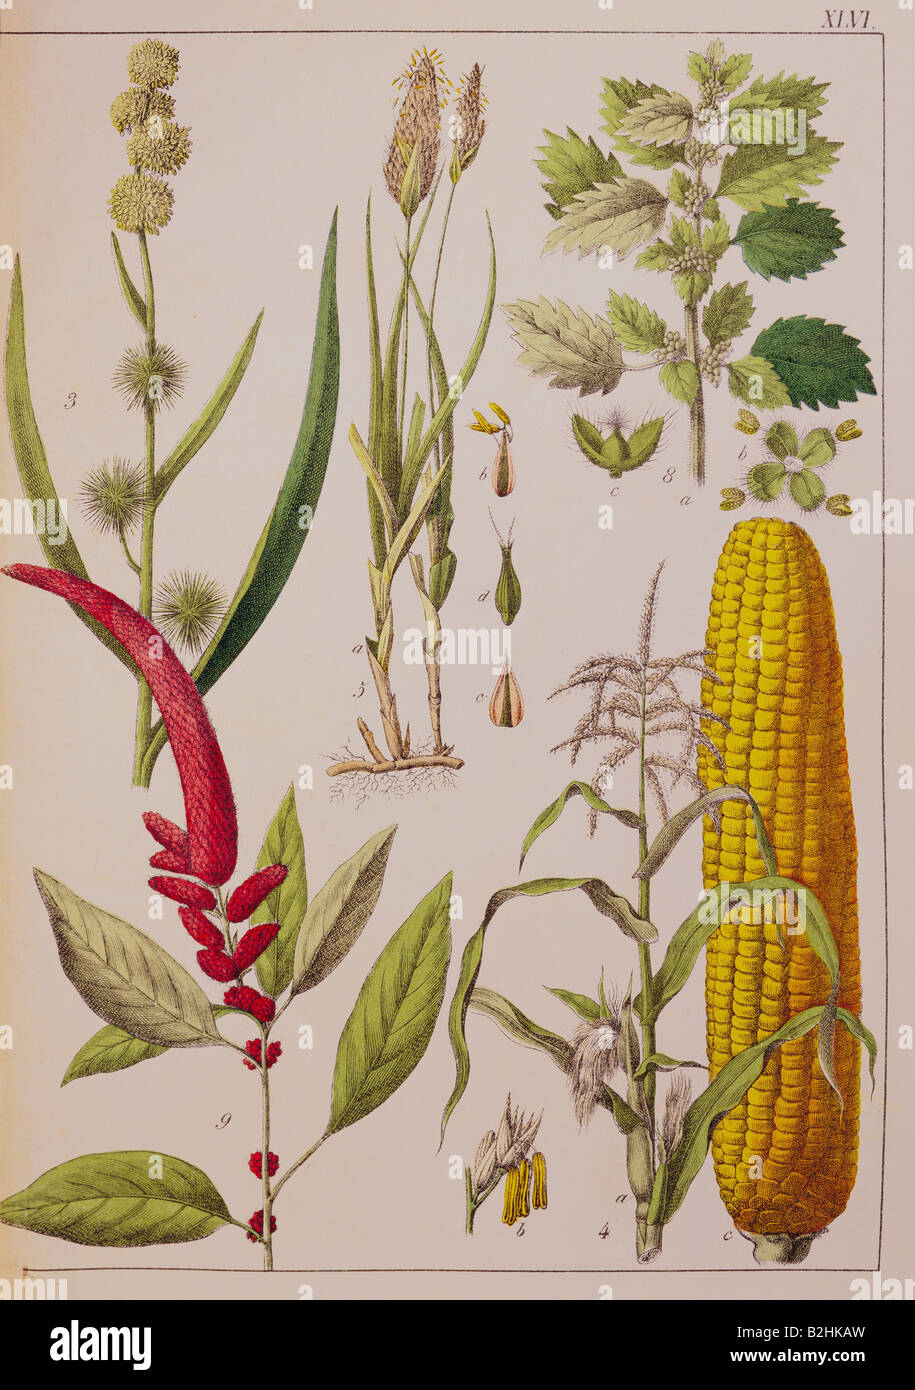 botany, grasses, from 'Naturgeschichte des Pflanzenreichs in Bildern' (Natural history of the kingdom of plants in pictures), Stuttgart, Esslingen, Germany, 1853, private collection, Stock Photo